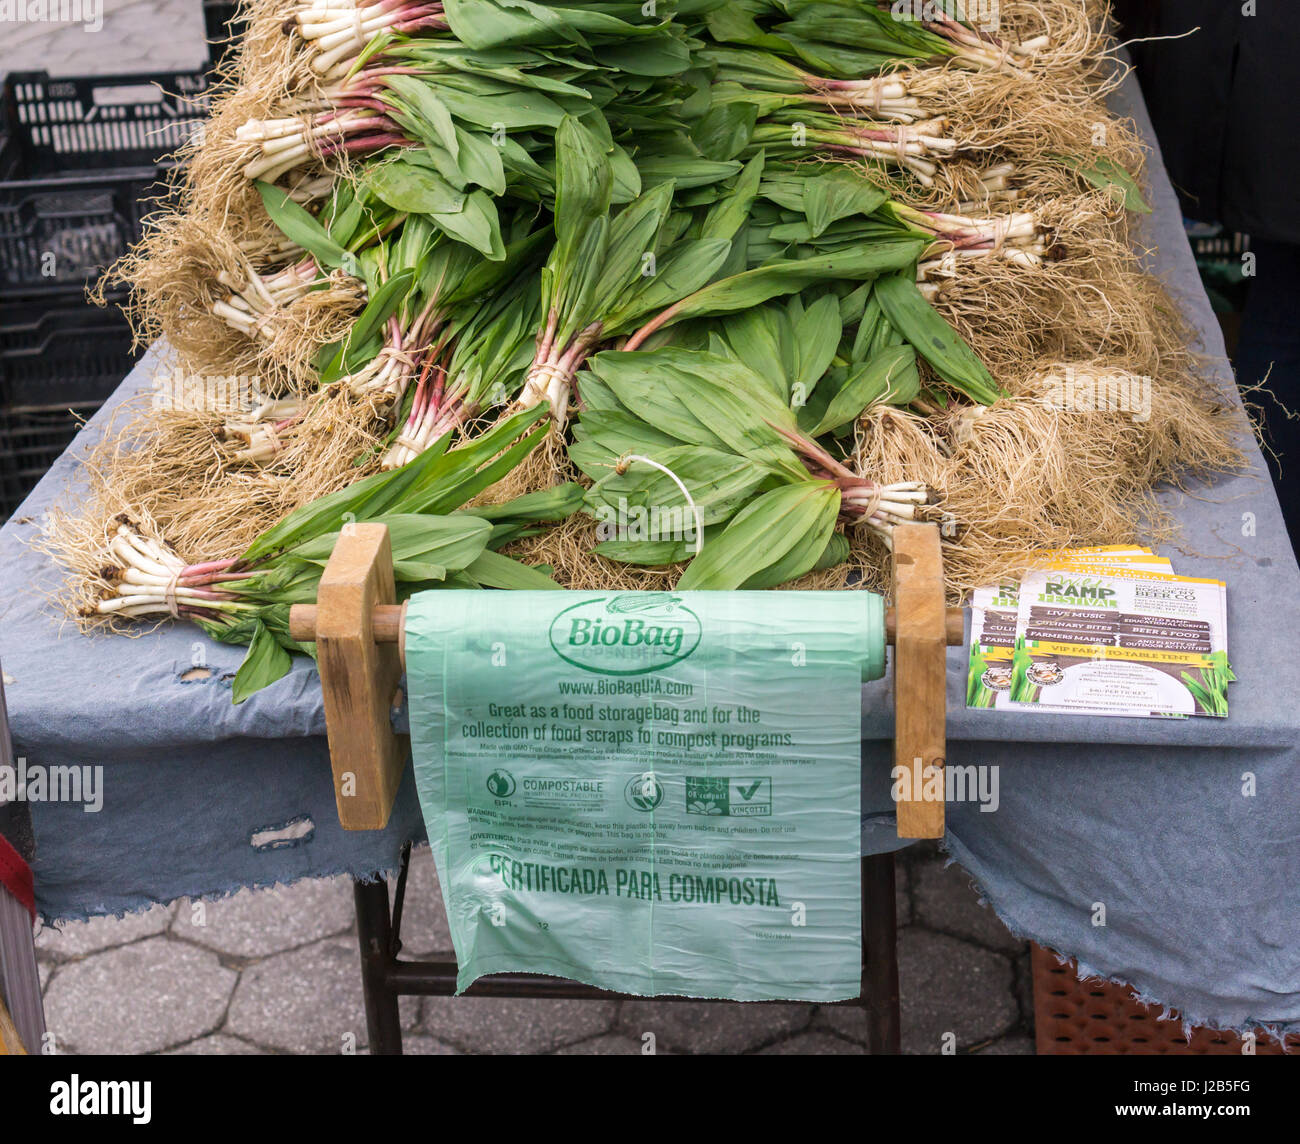 The sought after relative of the onion, ramps, are seen in the Union Square Greenmarket in New York on  Saturday, April 22, 2017. The vegetable, which can be eaten raw, inspires a cultish following due to their scarcity and limited season. Ramps are not cultivated but are foraged, probably by little ramp elves. (© Richard B. Levine) Stock Photo